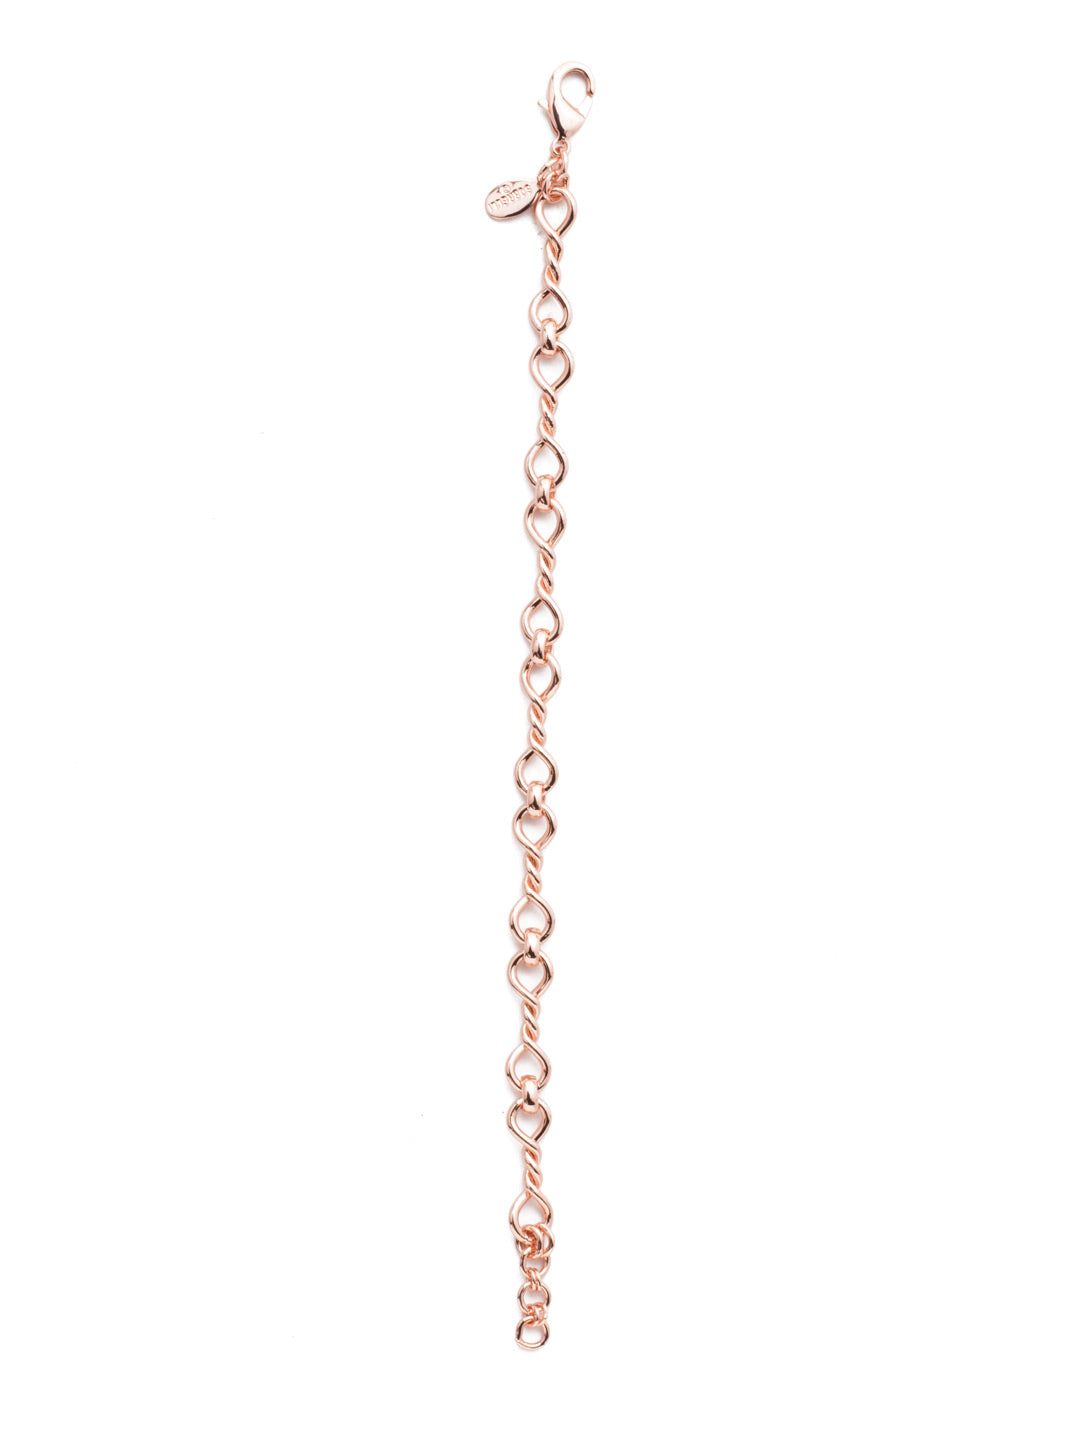 Cressida Tennis Bracelet - BES39RGCRY - <p>The Cressida Tennis Bracelet attches perfectly to any crystal charm or wear by itself for a simple classic look. From Sorrelli's Crystal collection in our Rose Gold-tone finish.</p>